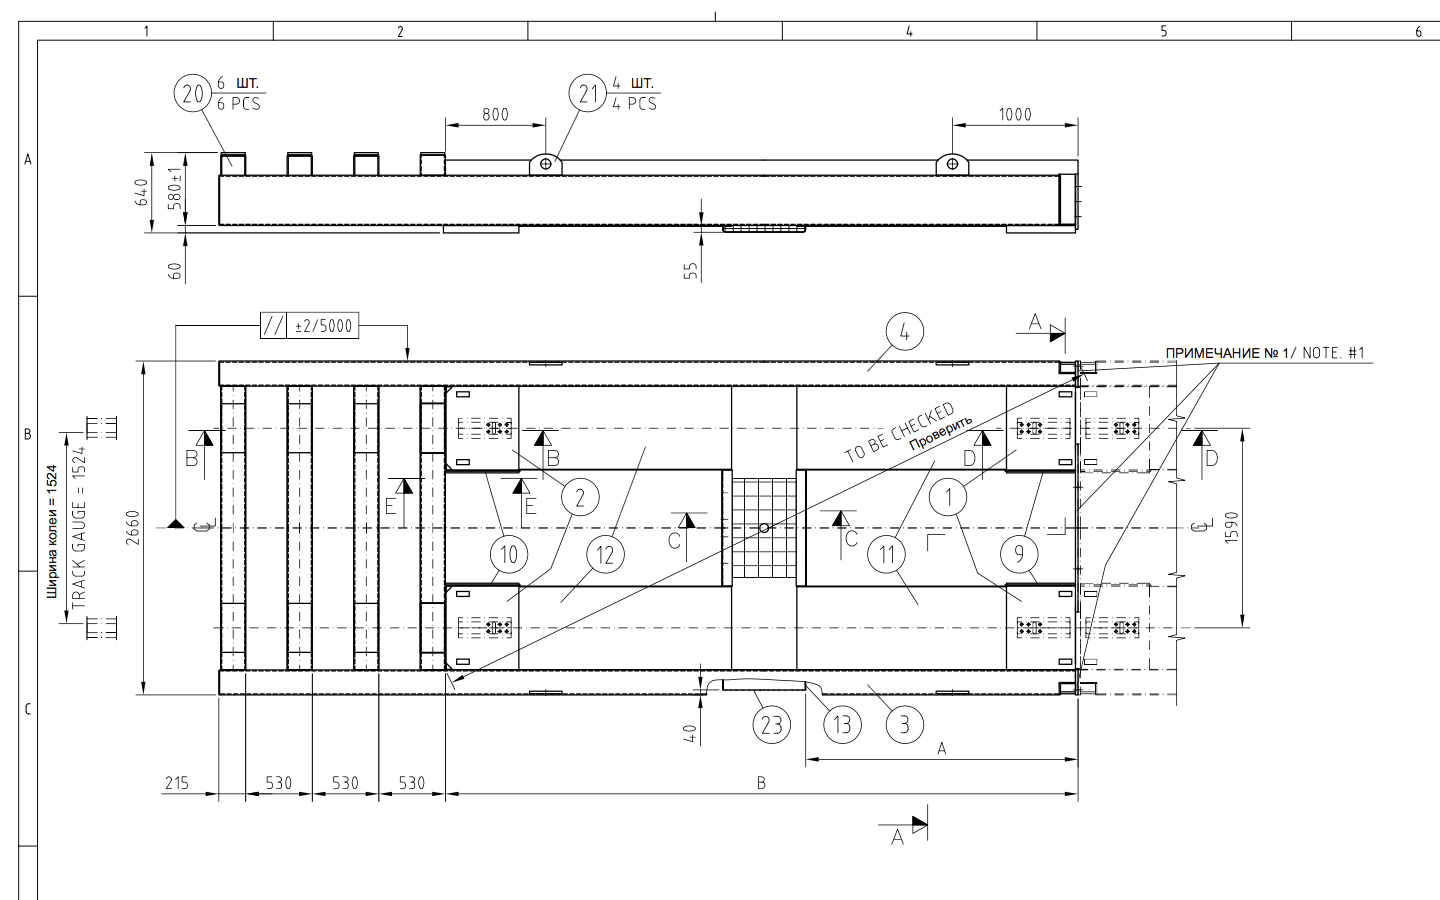 Technical drawing translation in the same file